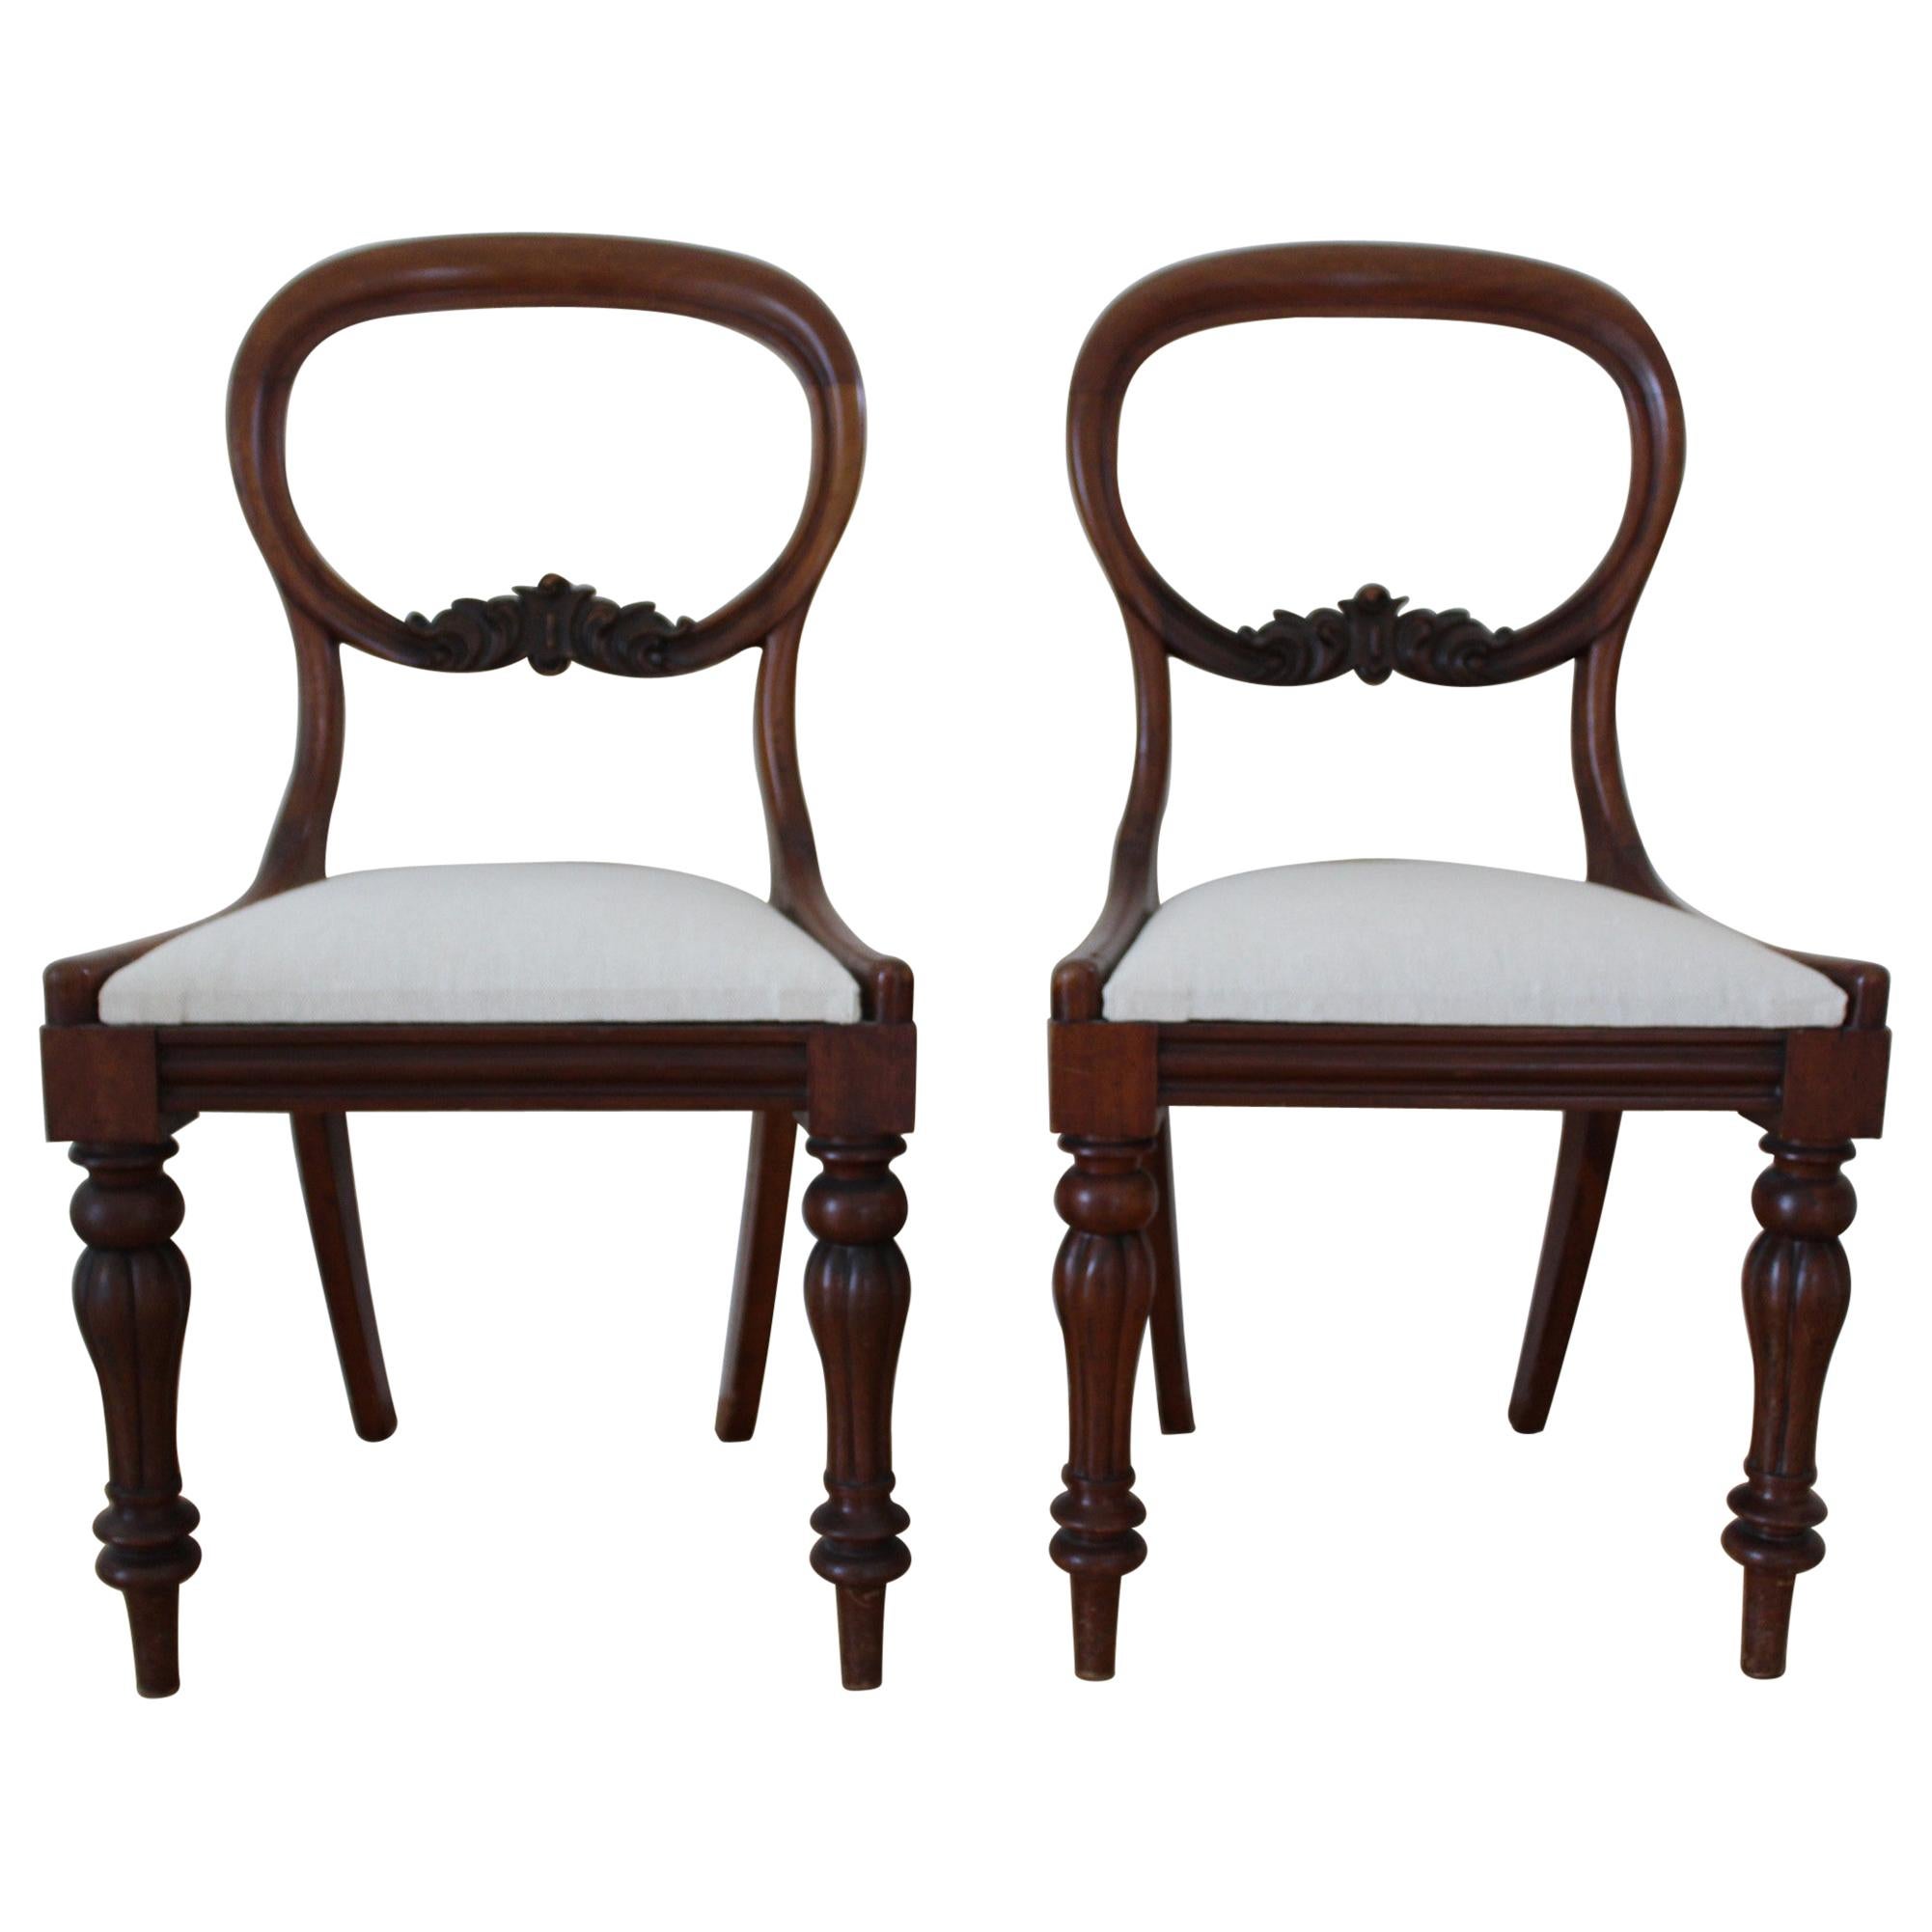 Pair of 19th Century Balloon Back Mahogany Side Chairs For Sale